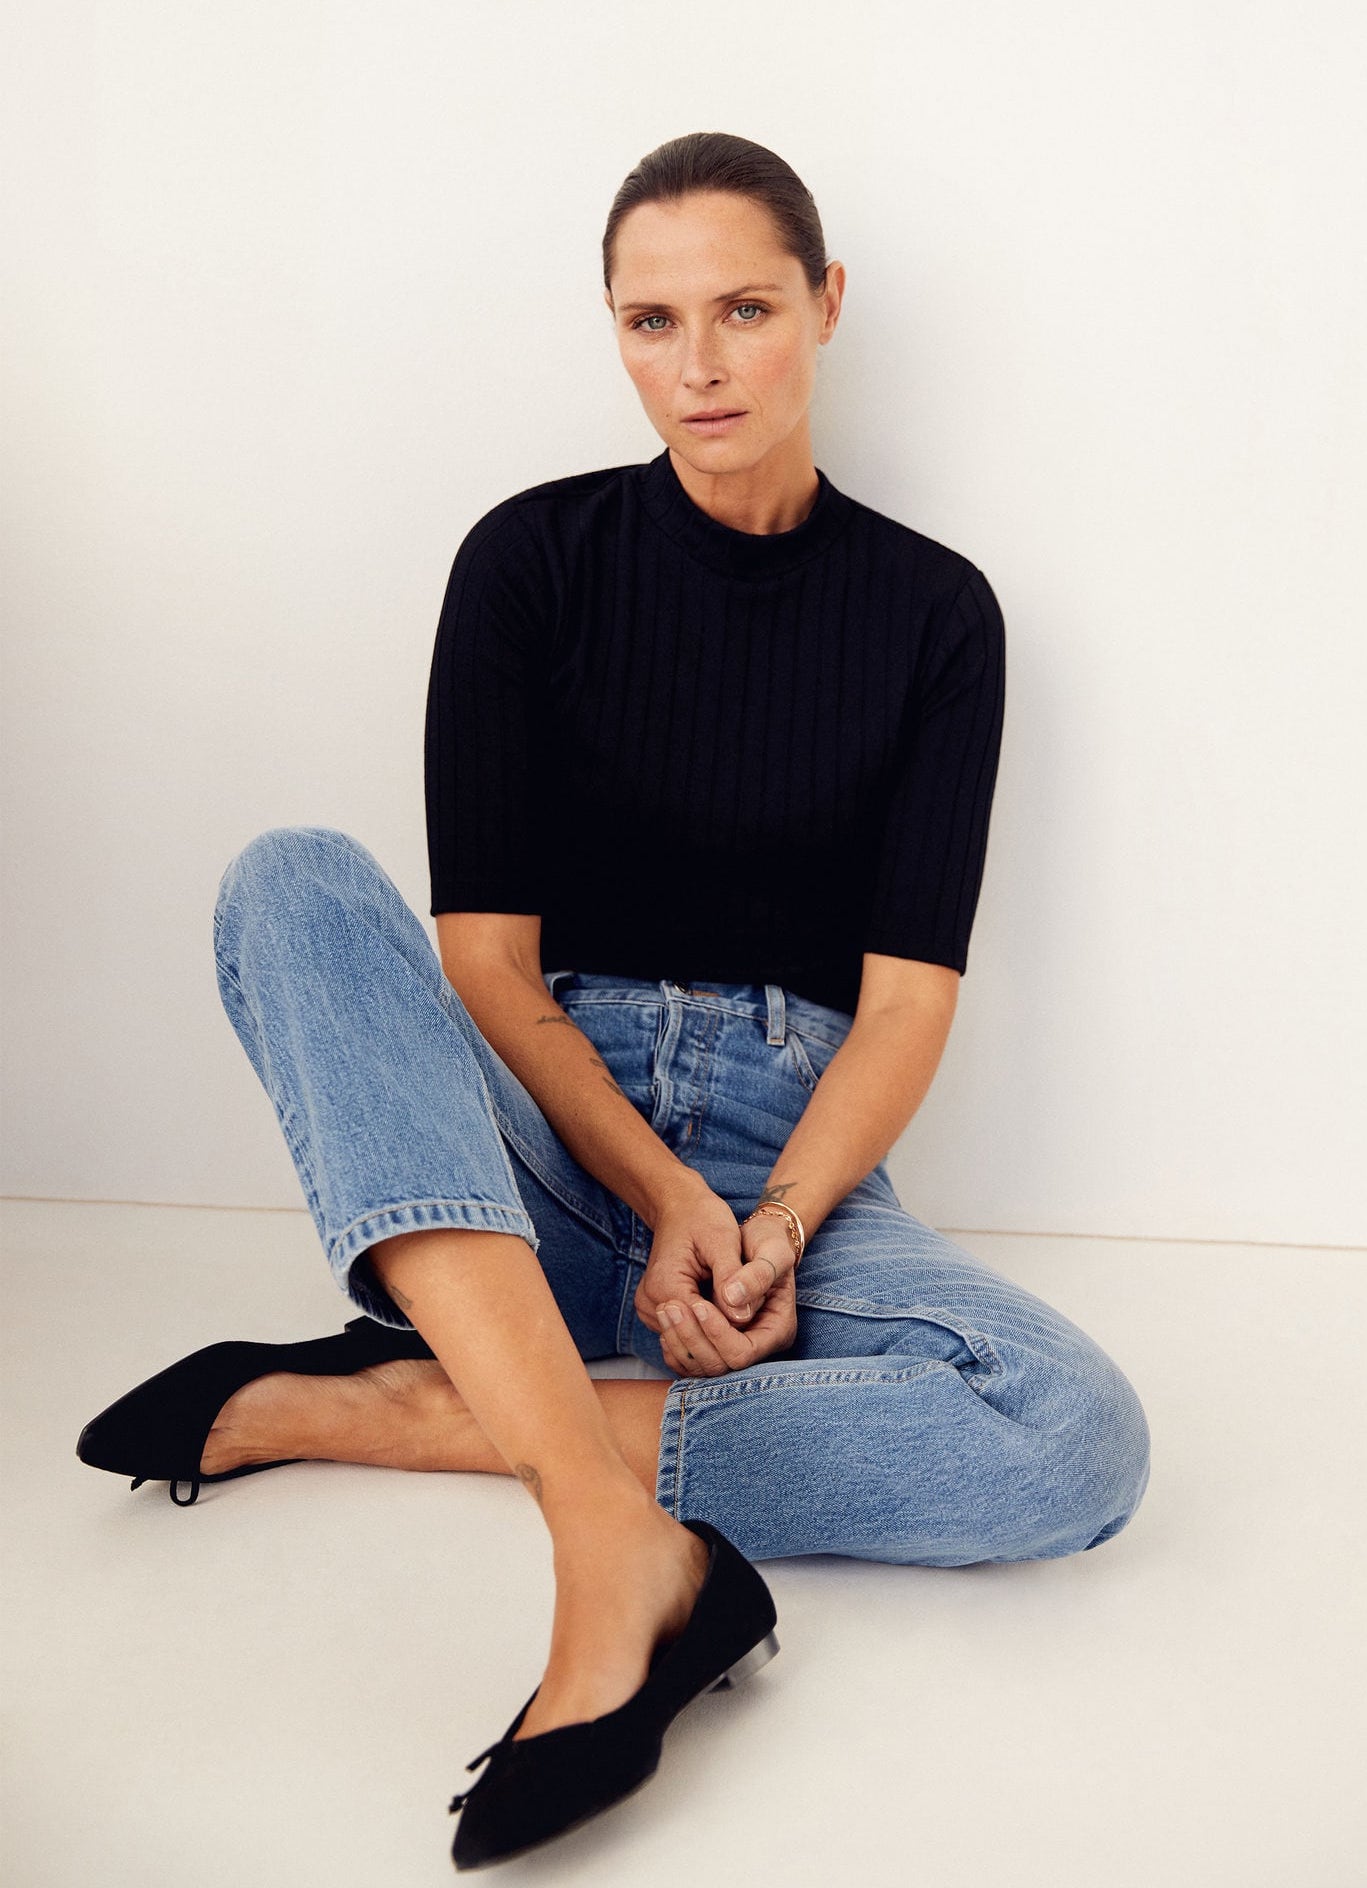 Classic casual chic outfit idea with short sleeve black turtleneck mock neck top, straight-leg jeans, black ballet flats — Tasha Tilberg for Mango